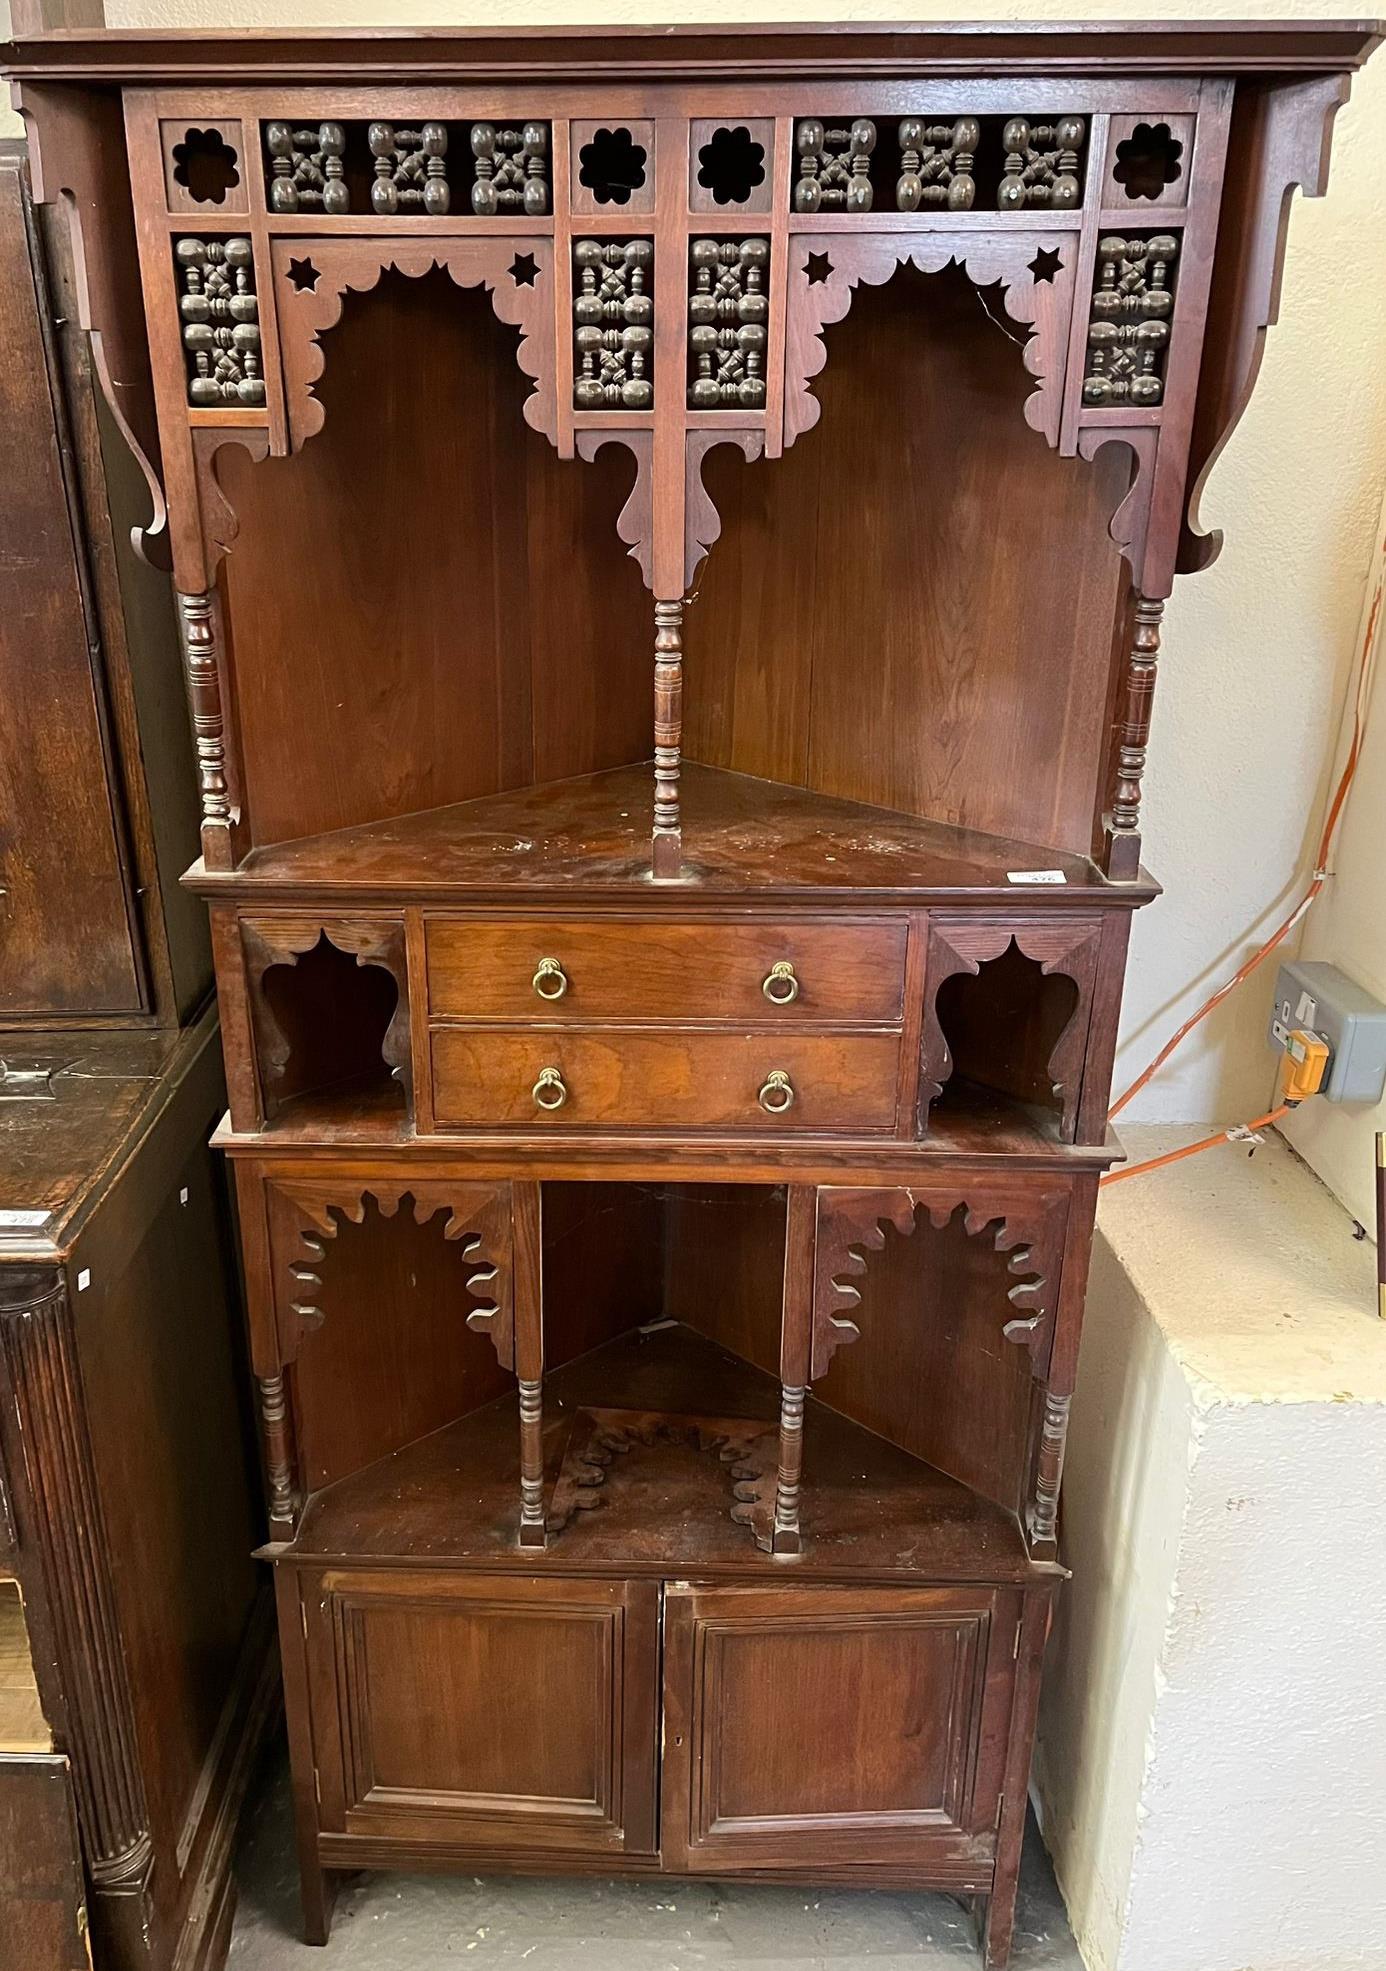 Early 20th century Moorish corner cabinet, probably by Liberty & Co. Possibly designed by Leonard